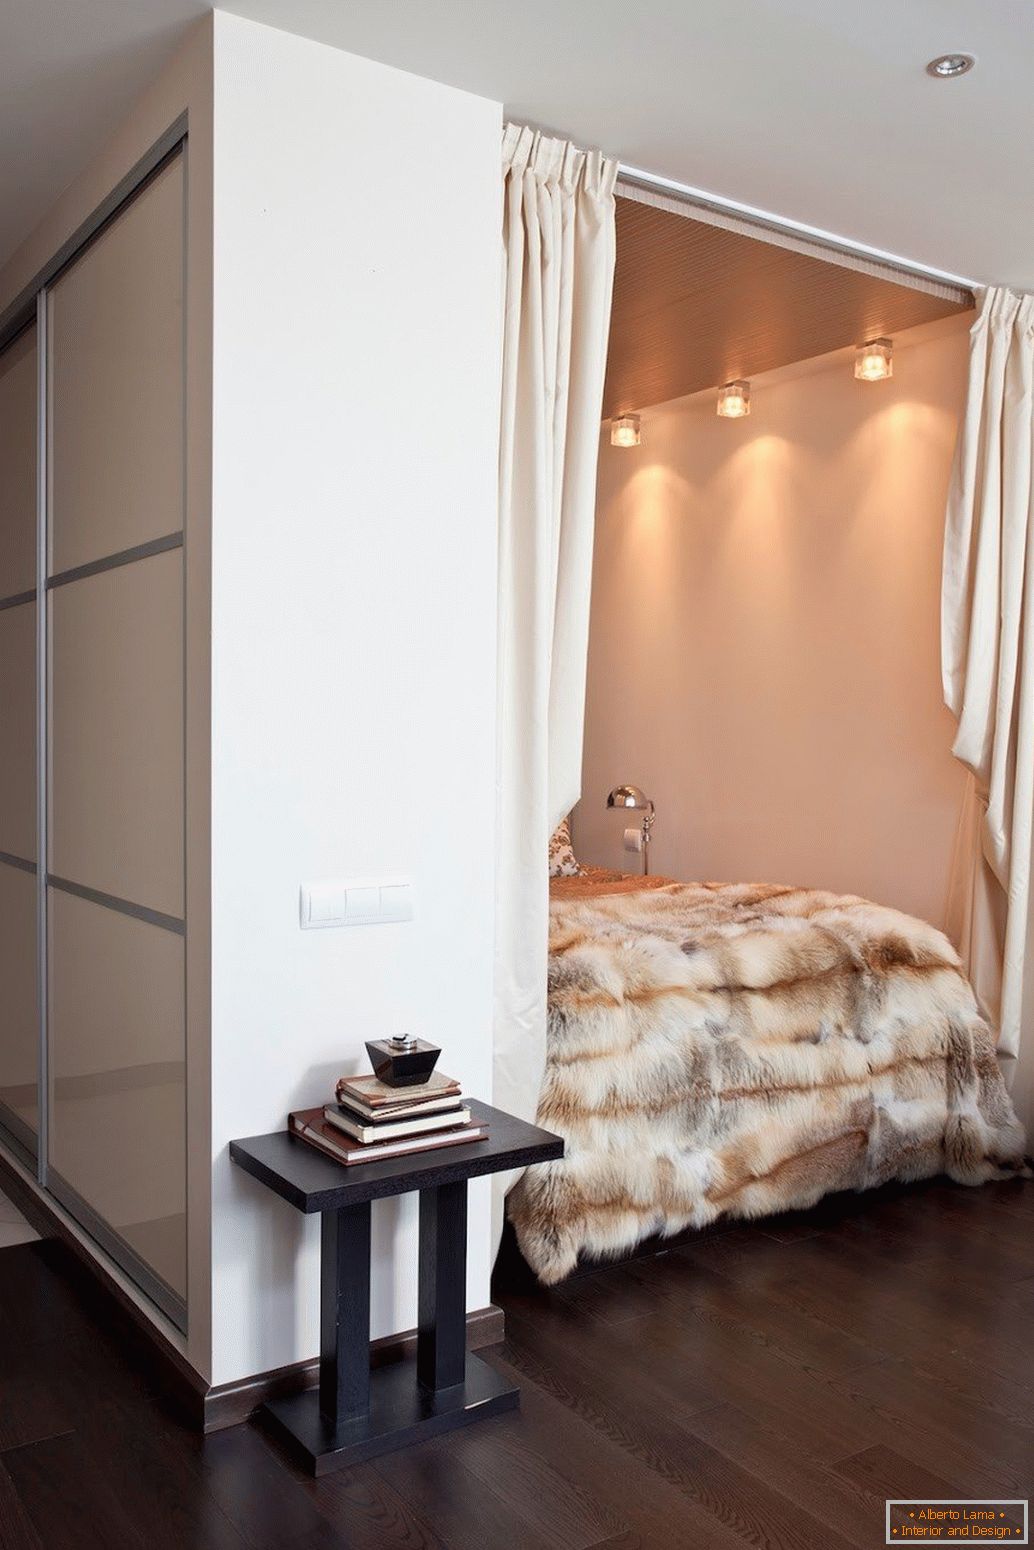 Niche allows you to create an intimate zone in the apartment